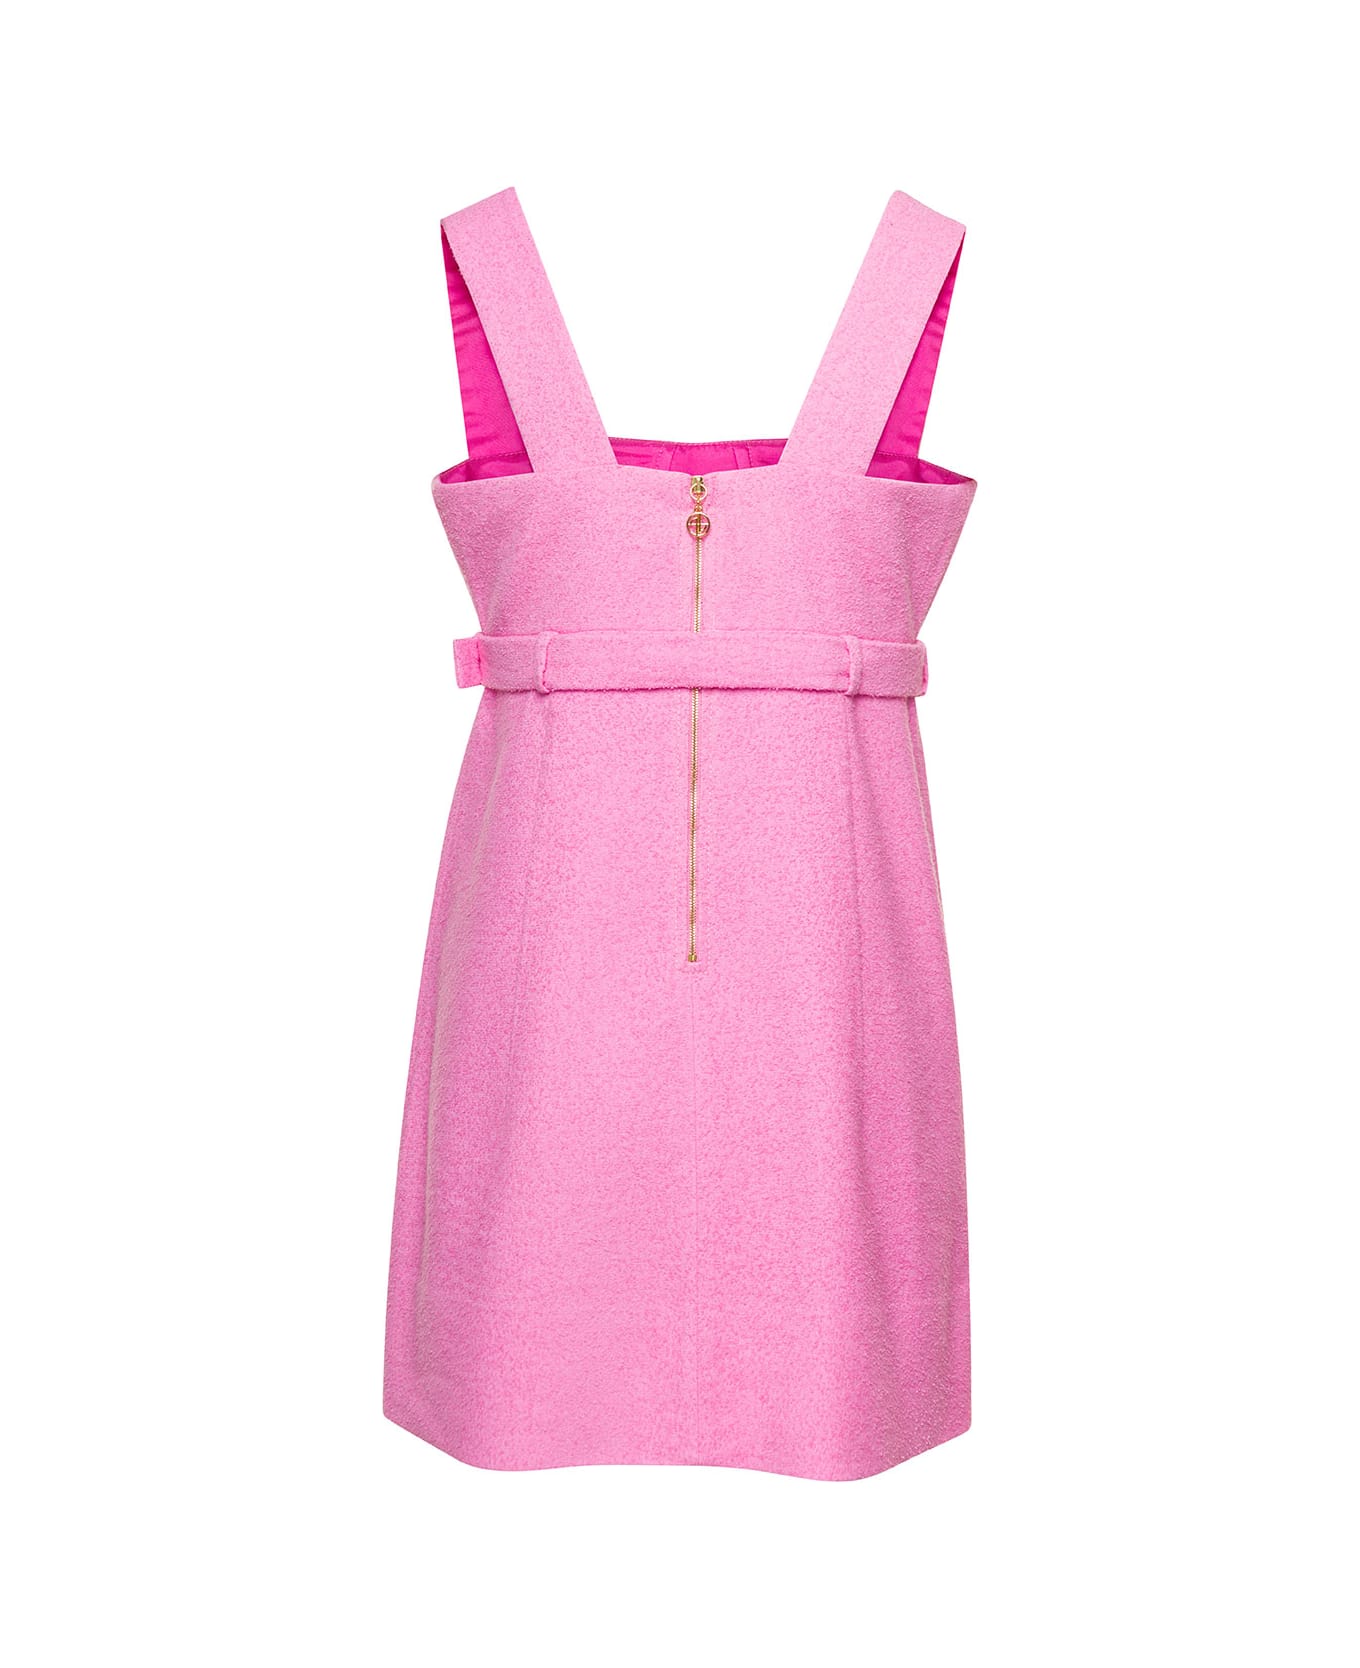 Patou Pink Corsage Belted Minidress In Cotton Blend Woman - Pink